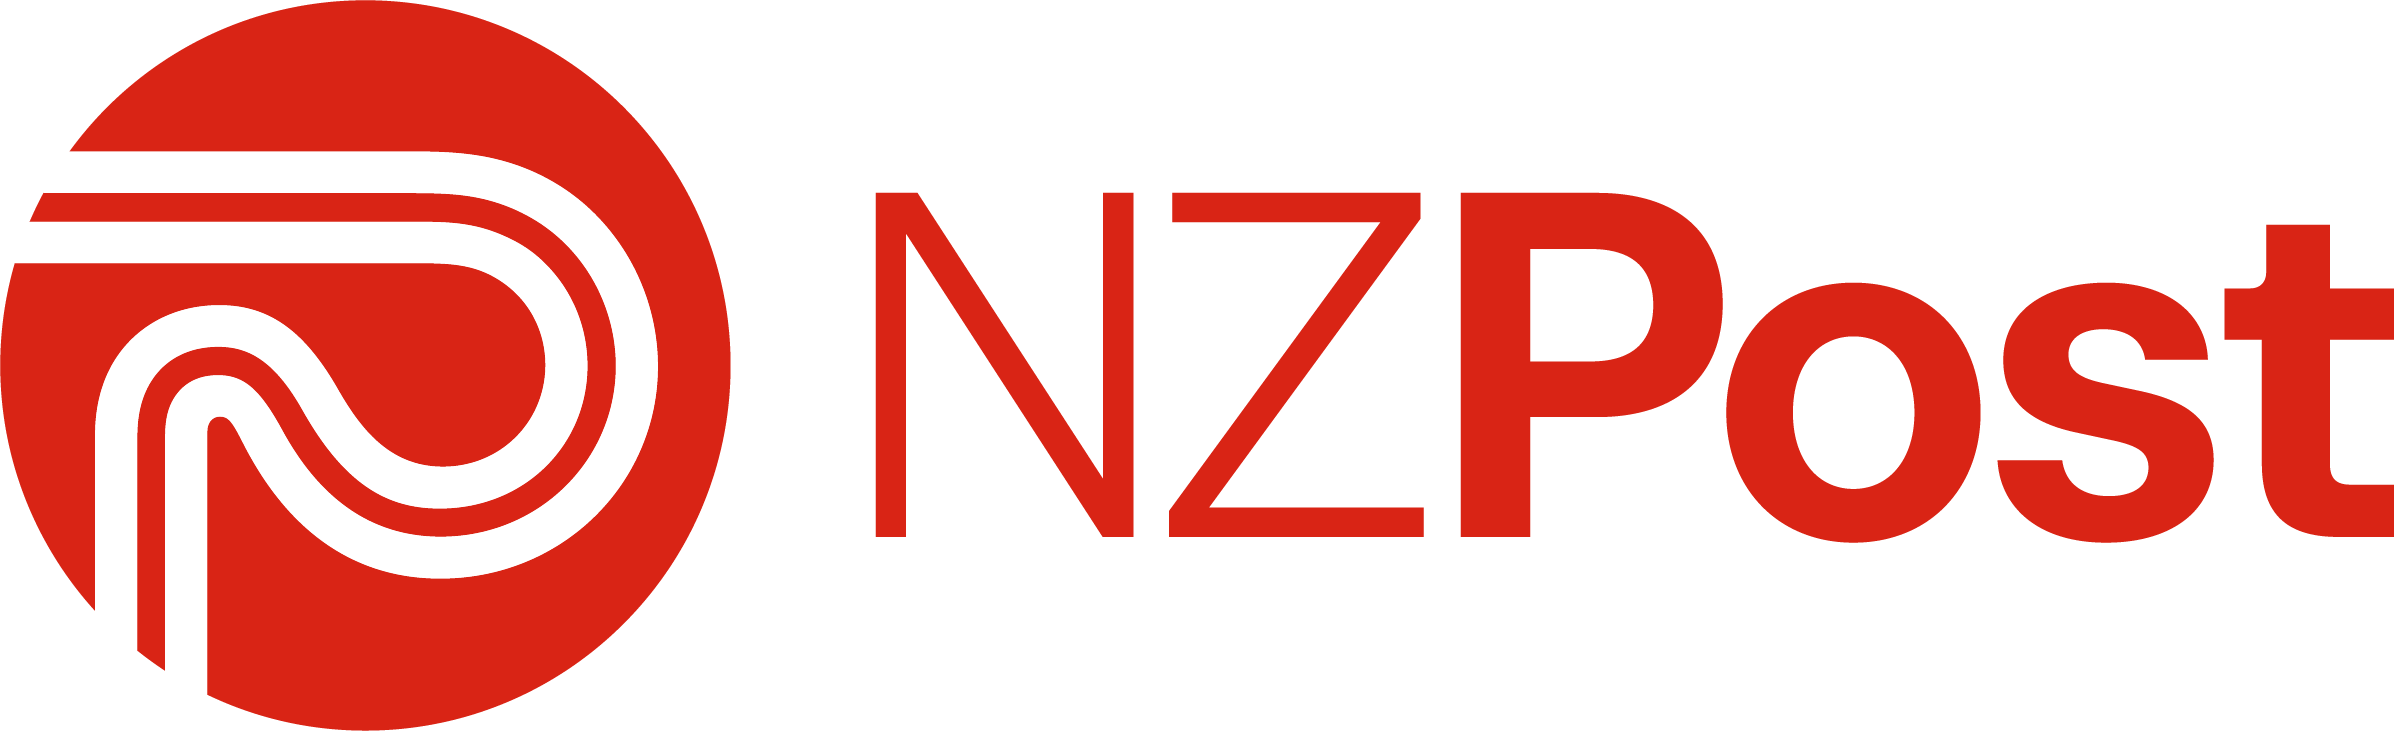 Processing Officer – Part Time Jobs in New Zealand